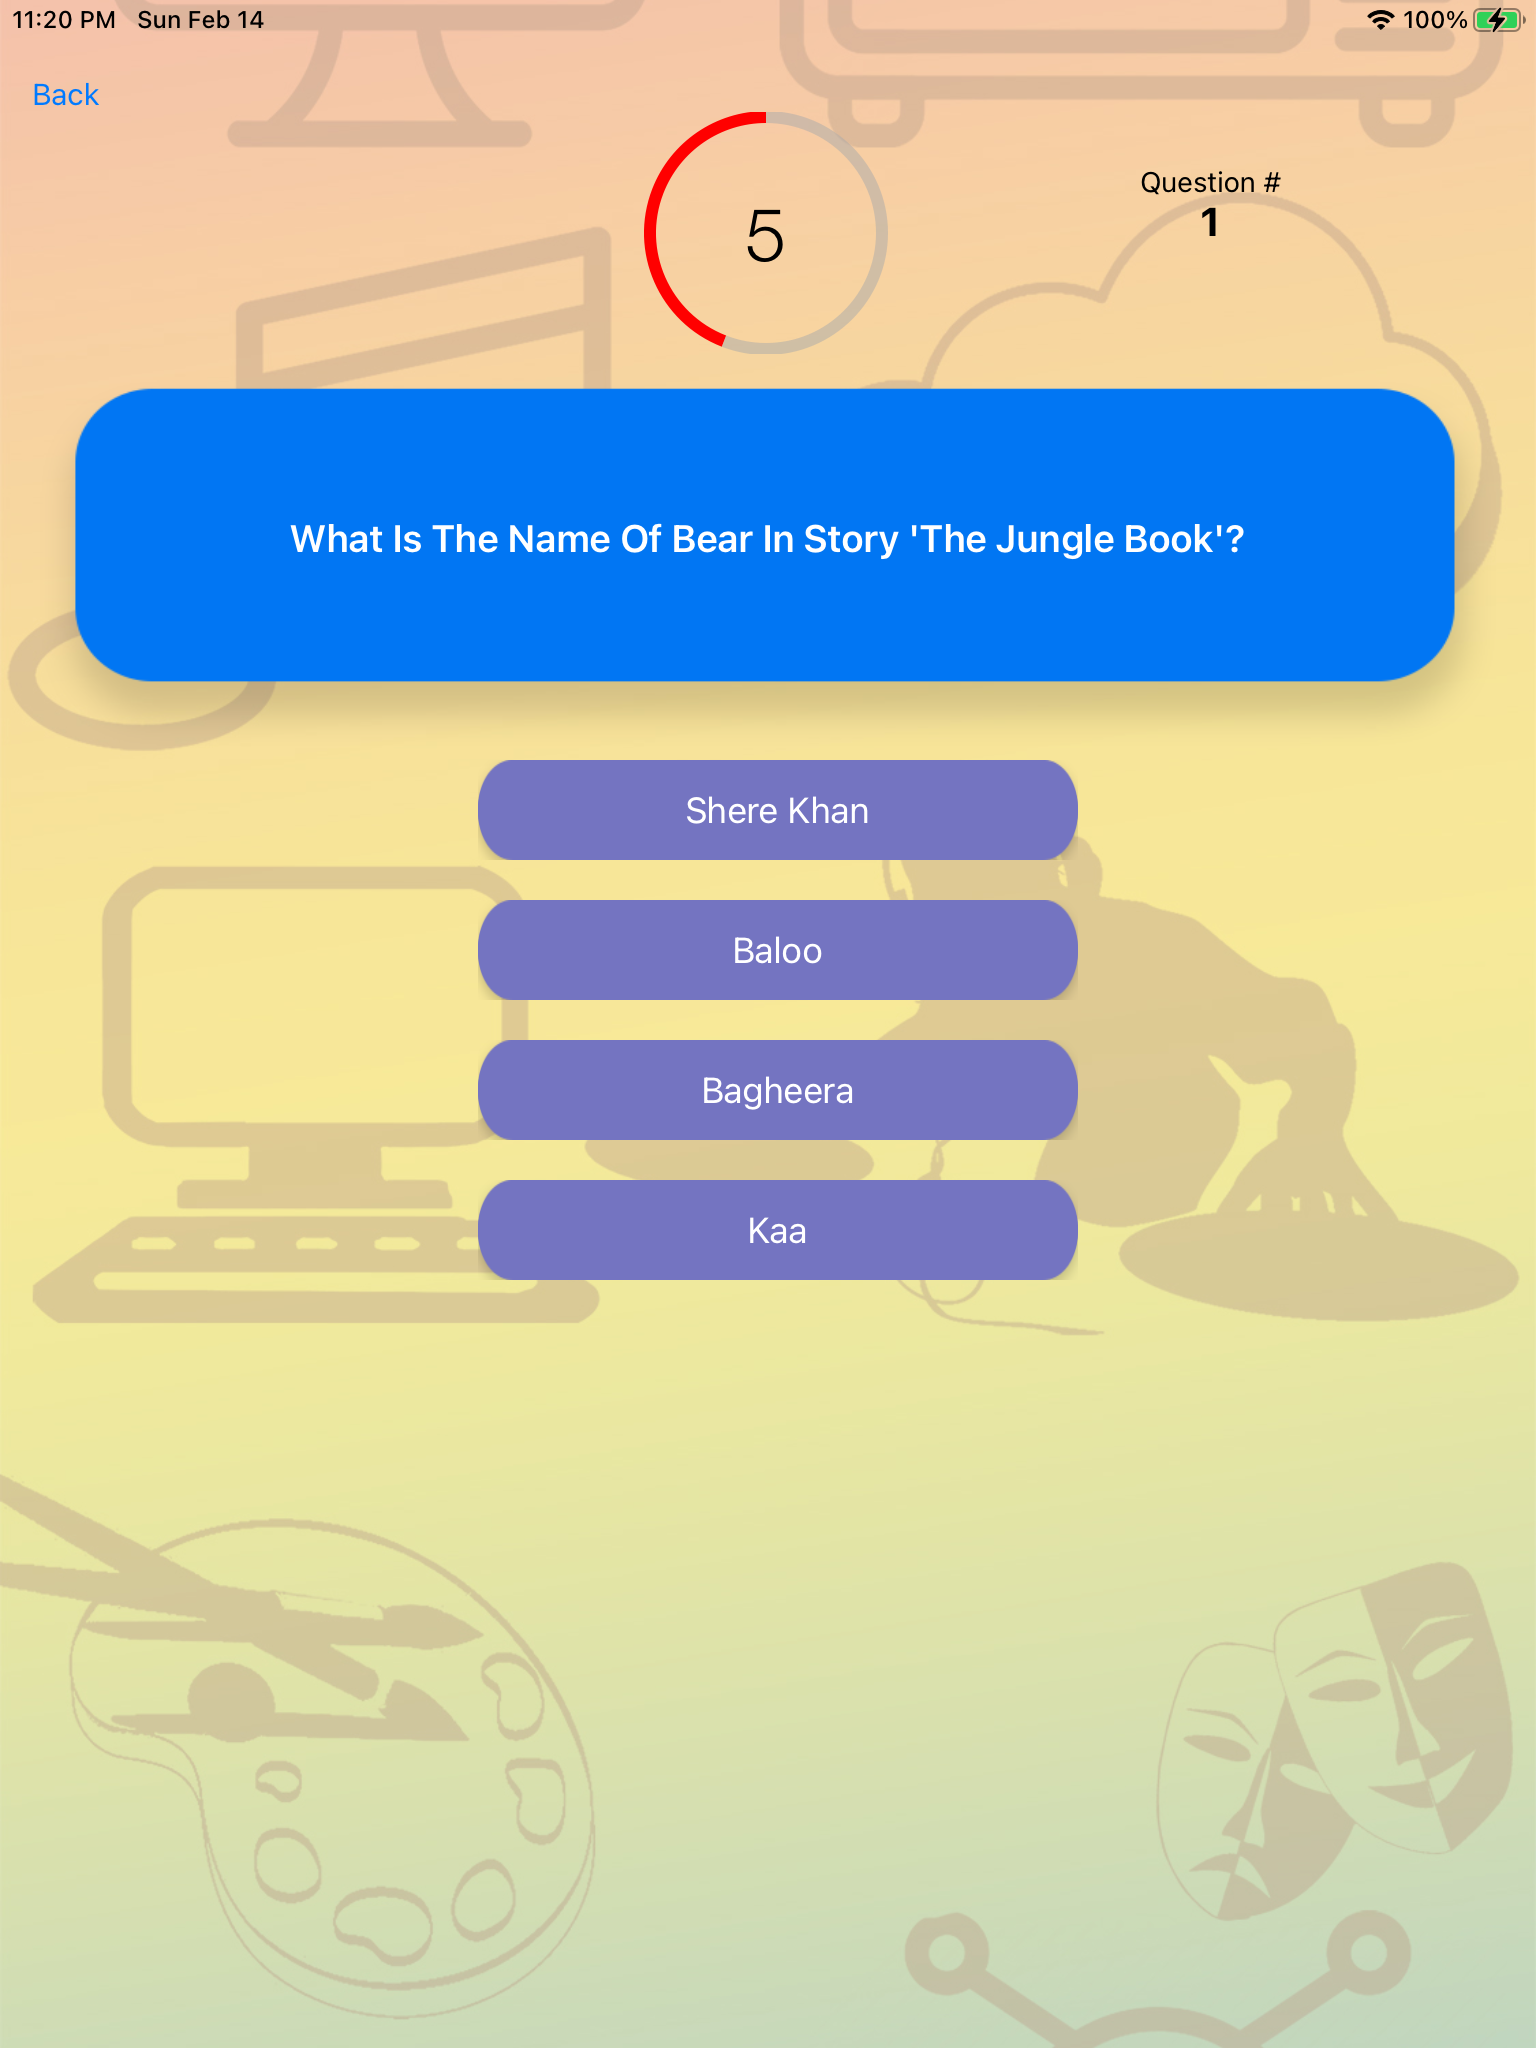 Take10 Trivia iPhone/iPad App Review | GiveMeApps